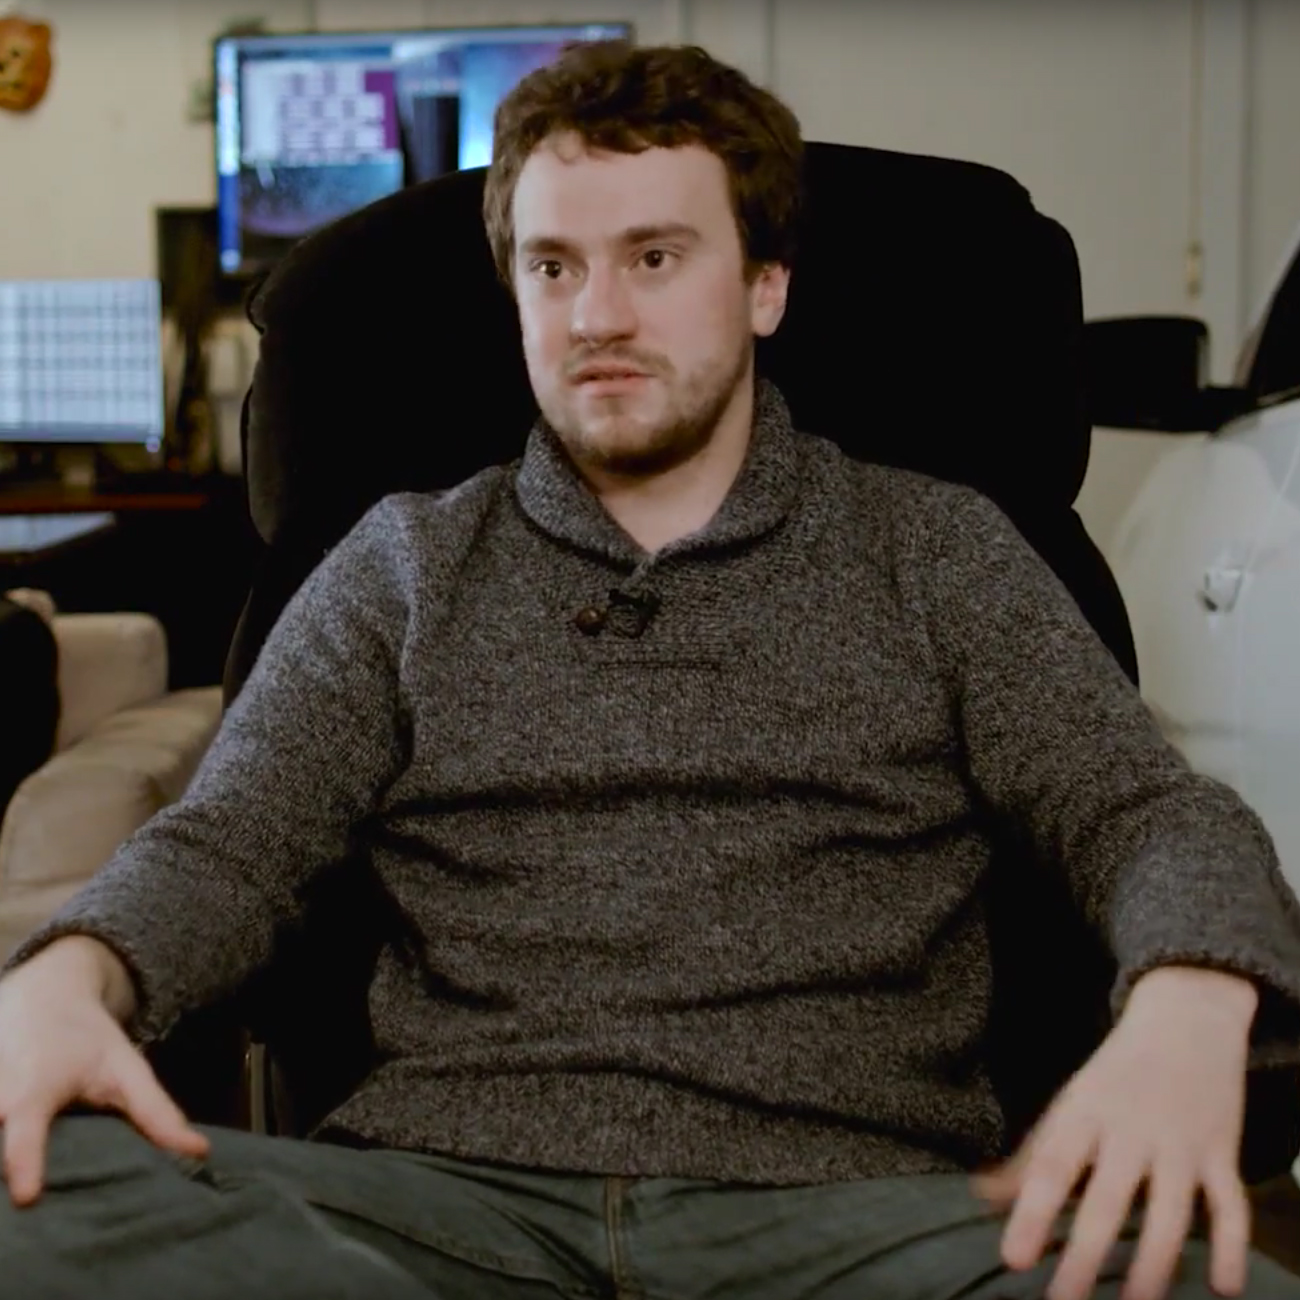 Infamous Hacker George Hotz Calls Bitcoin Cash the "Real Bitcoin"